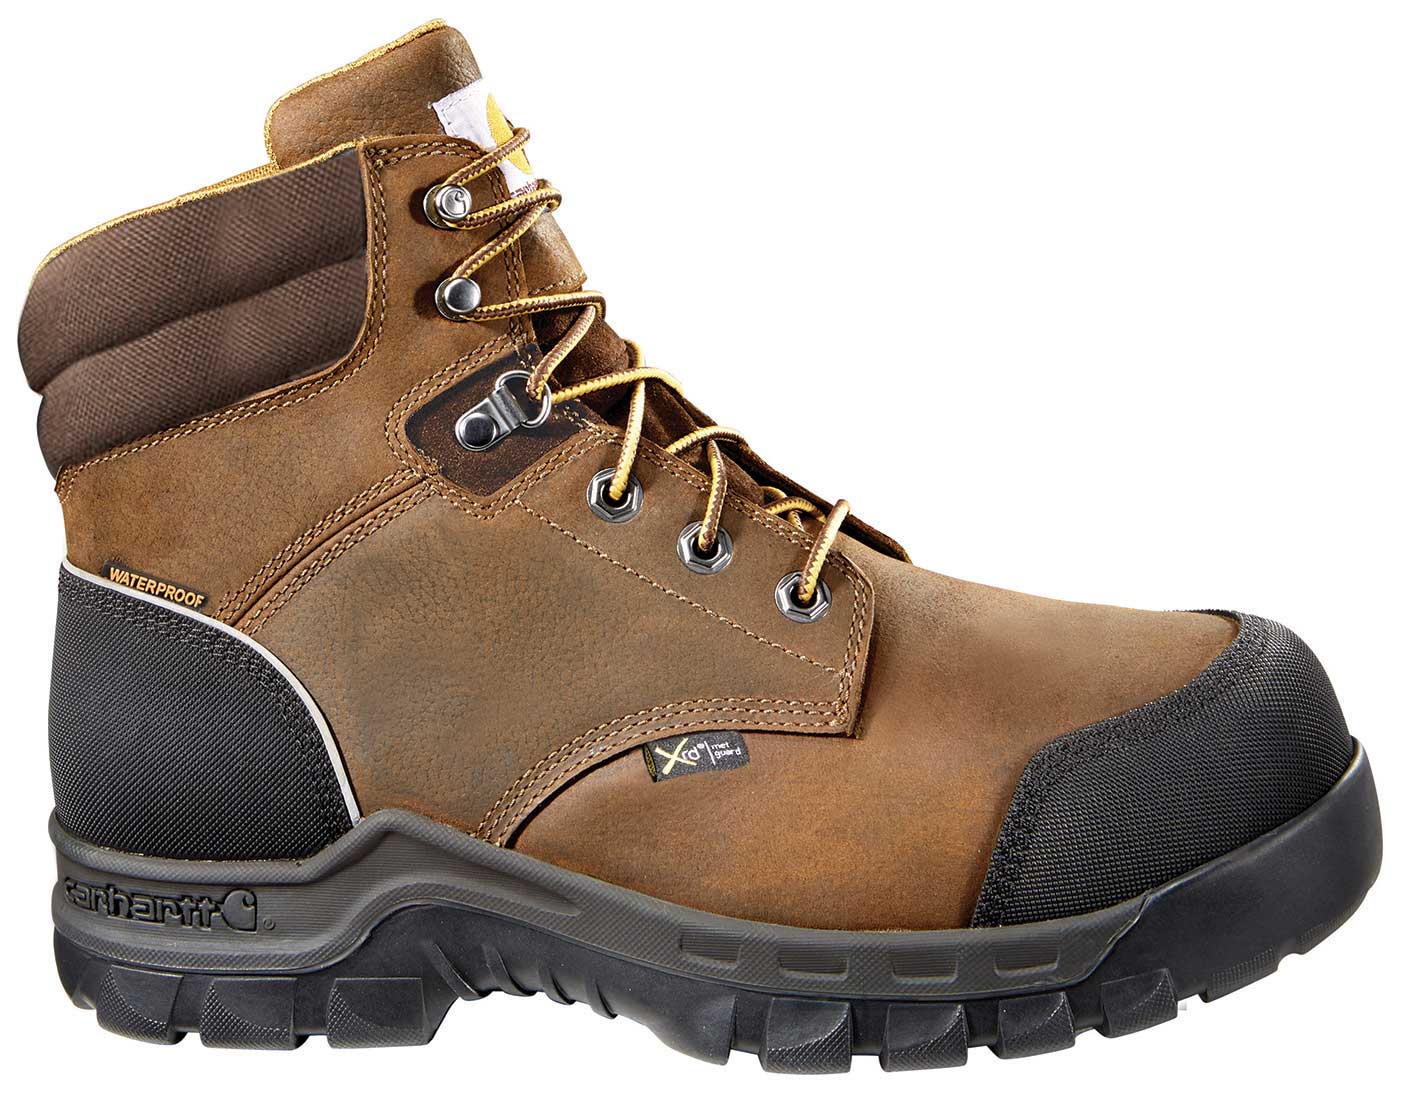 mens work boots with metatarsal guard